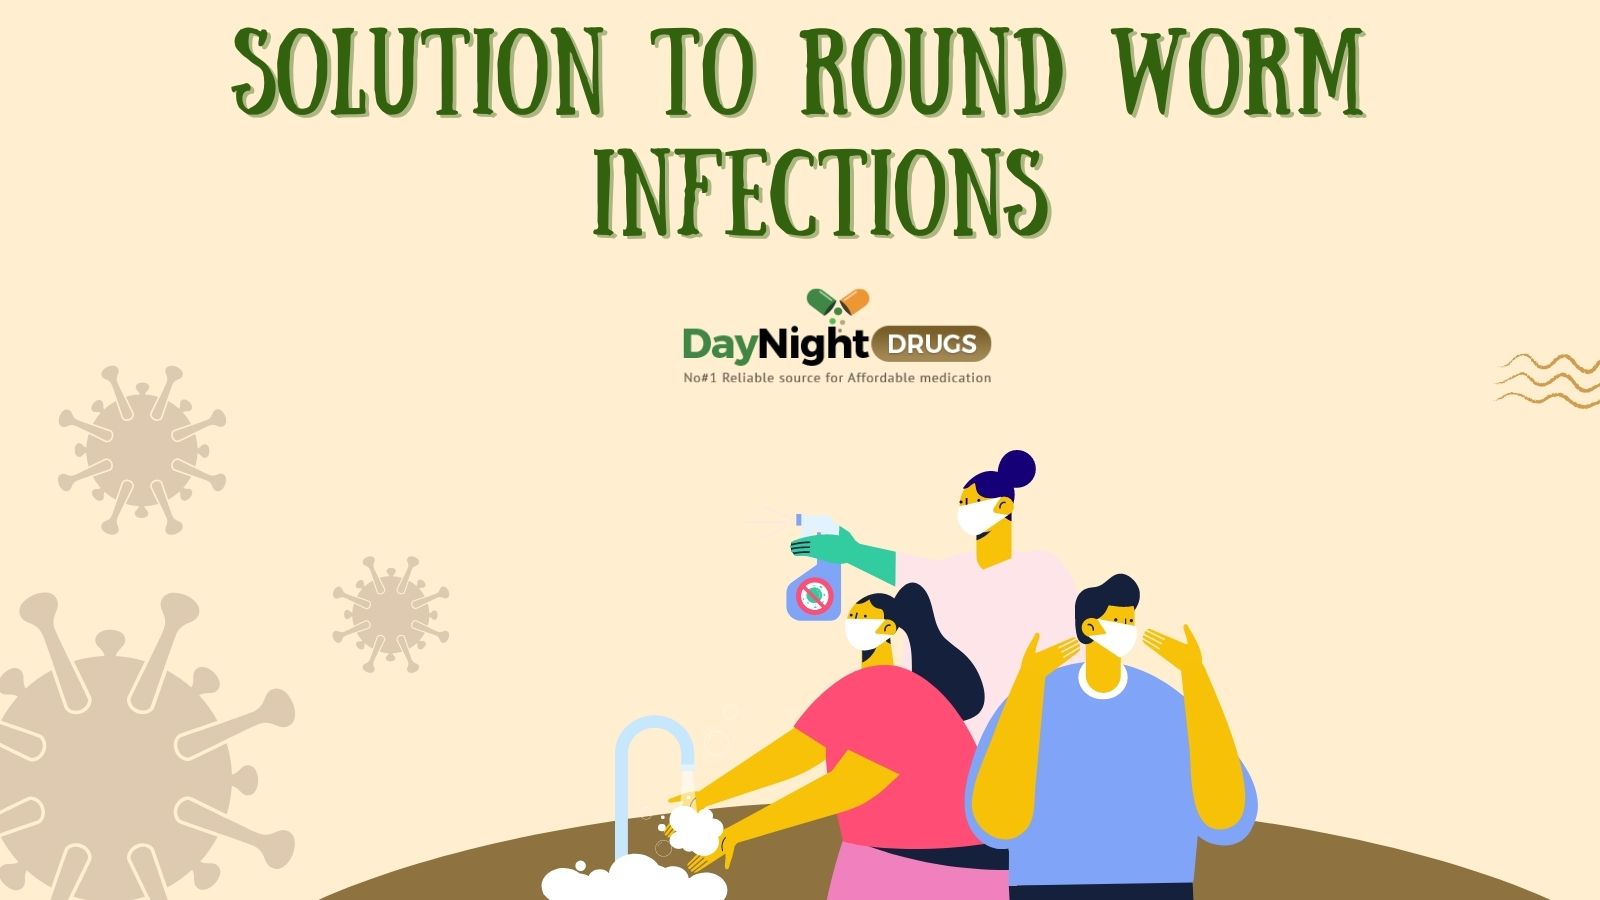 Solutions to Round Worm Infections